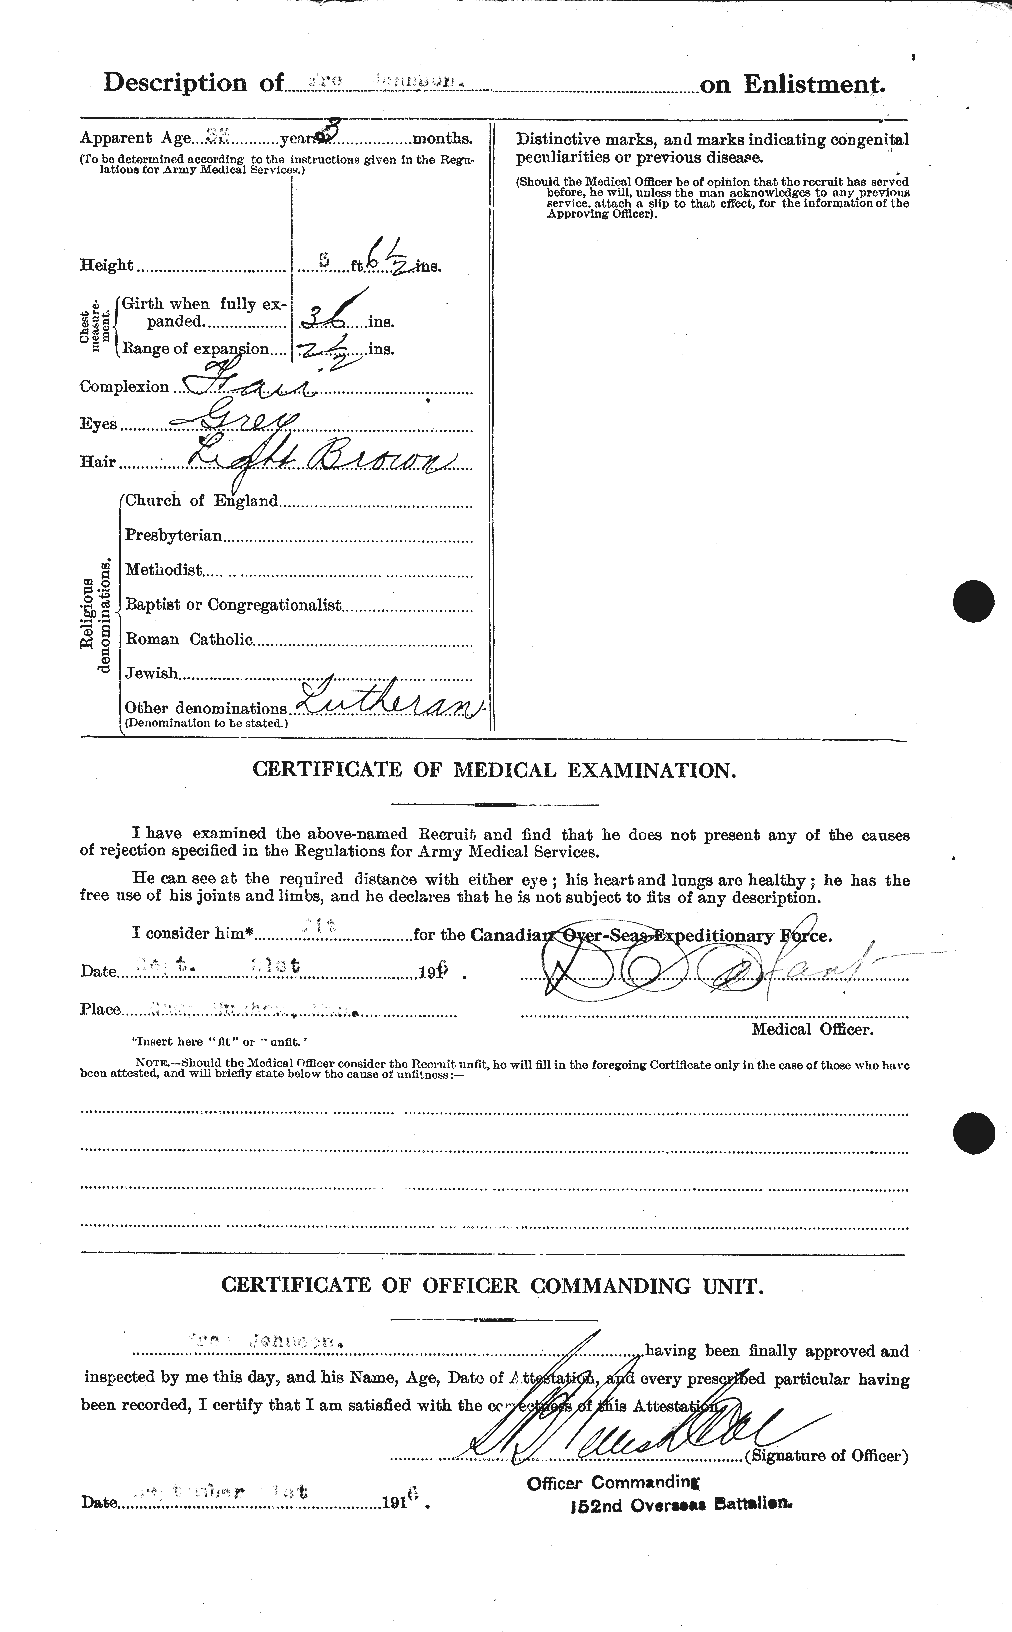 Personnel Records of the First World War - CEF 423292b